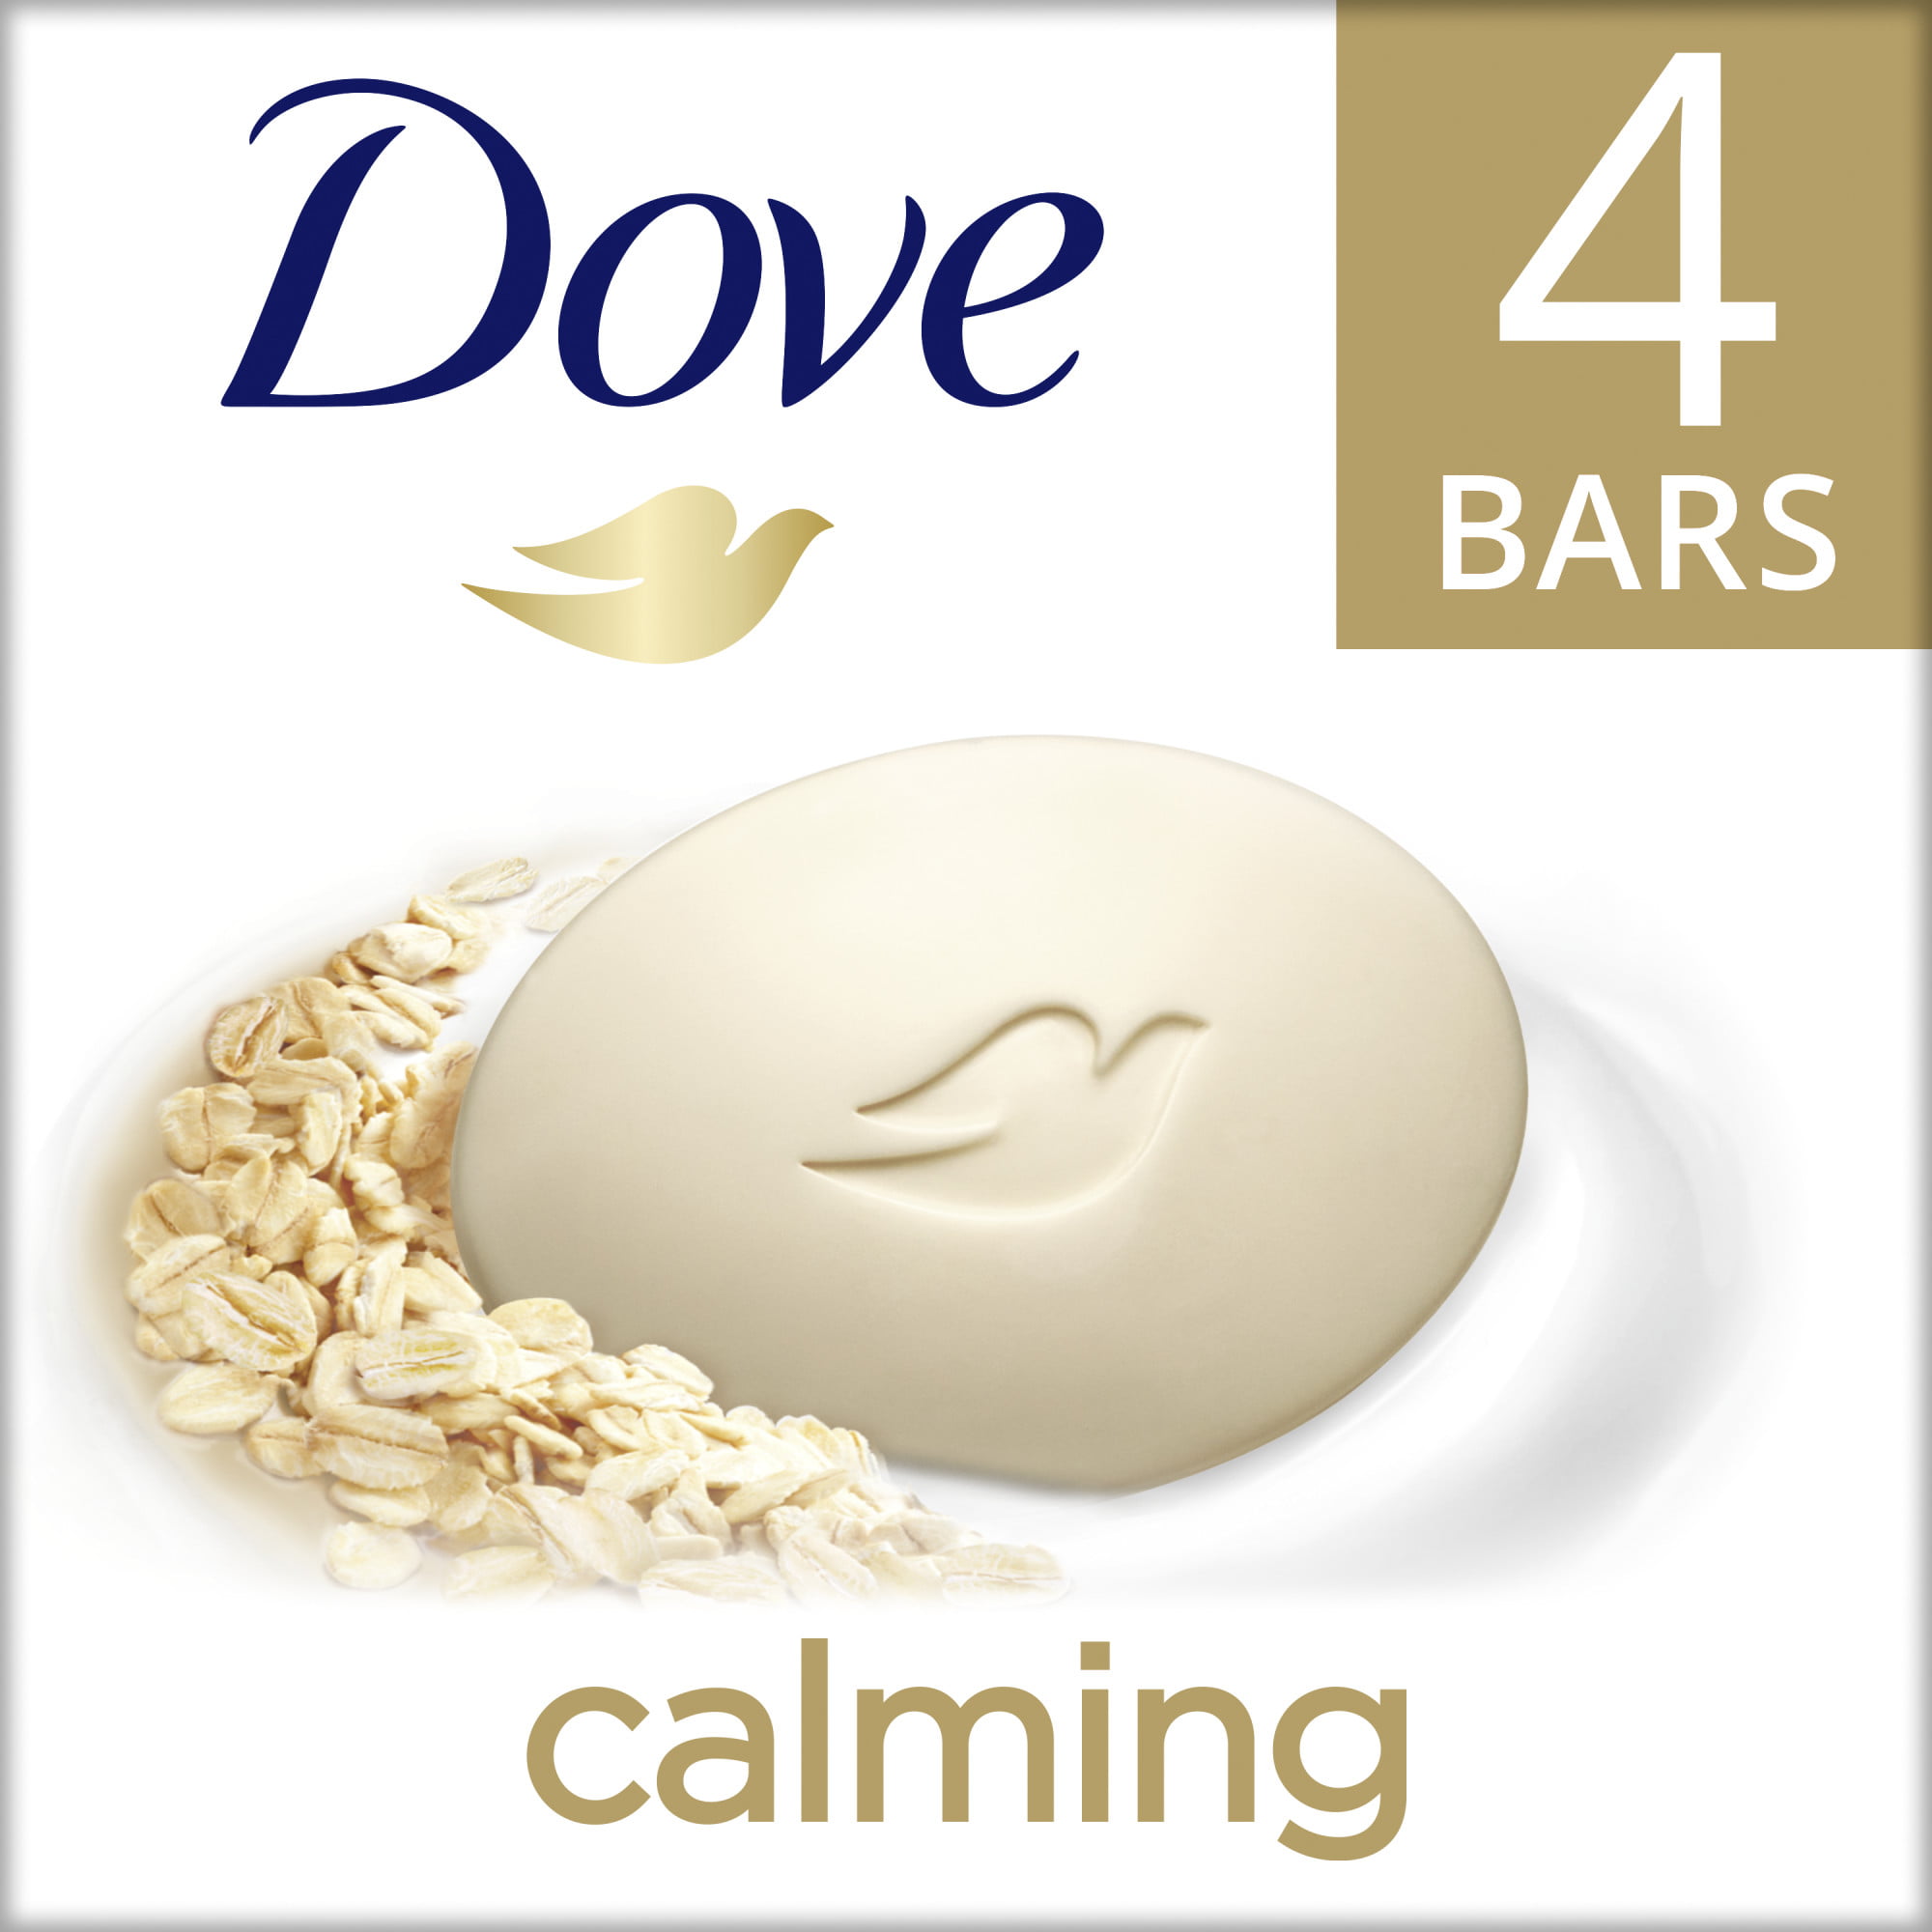 Dove 4 Bars - Beauty Bar Calming Oatmeal and Rice Milk Scent, 3.75 Oz - image 1 of 5